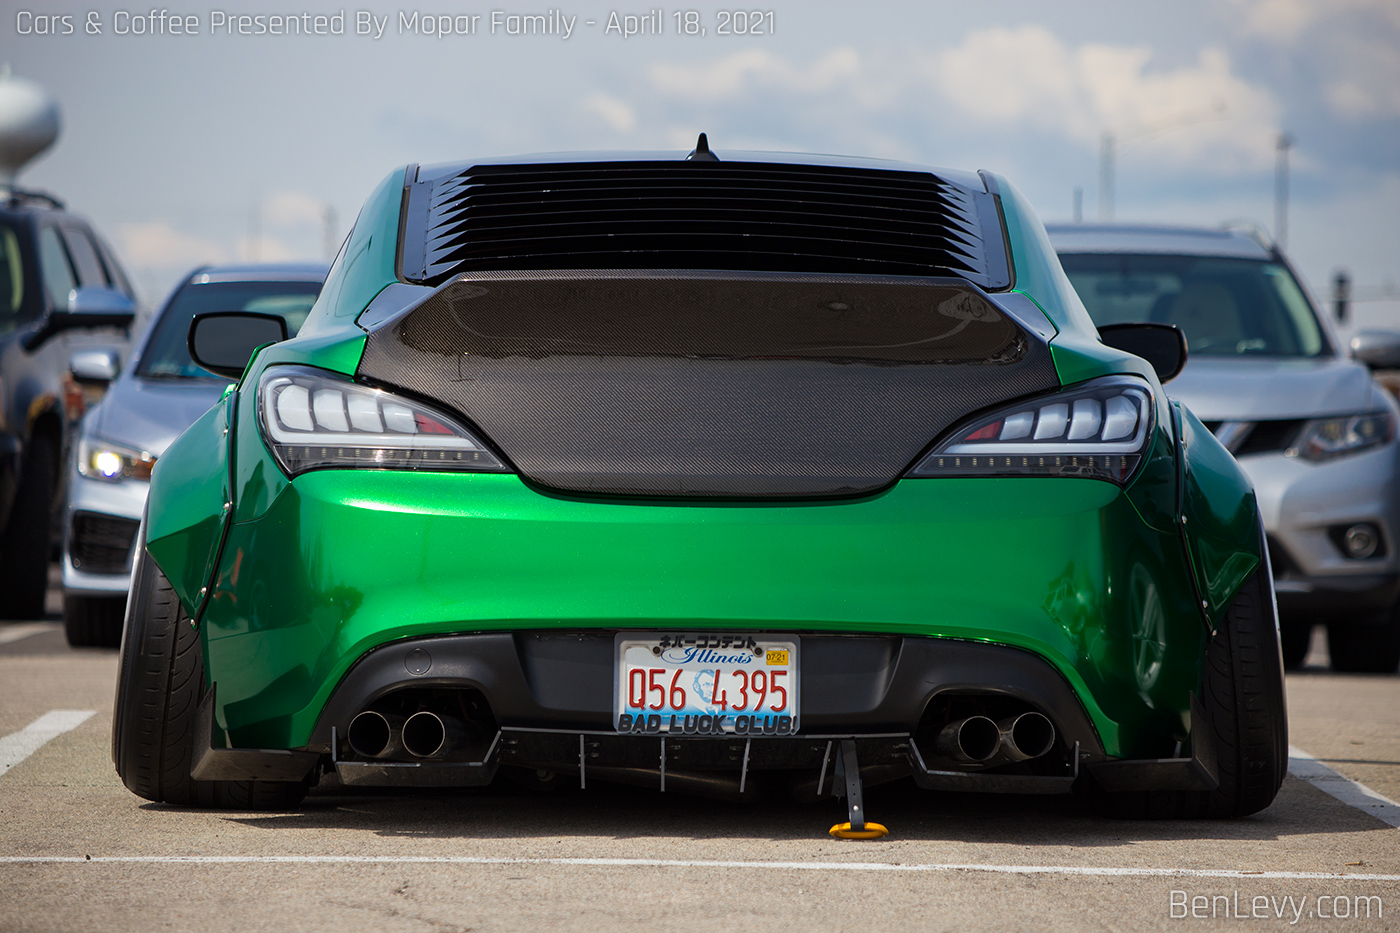 Green Hyundai Genesis Coupe with Carbon Fiber Trunklid